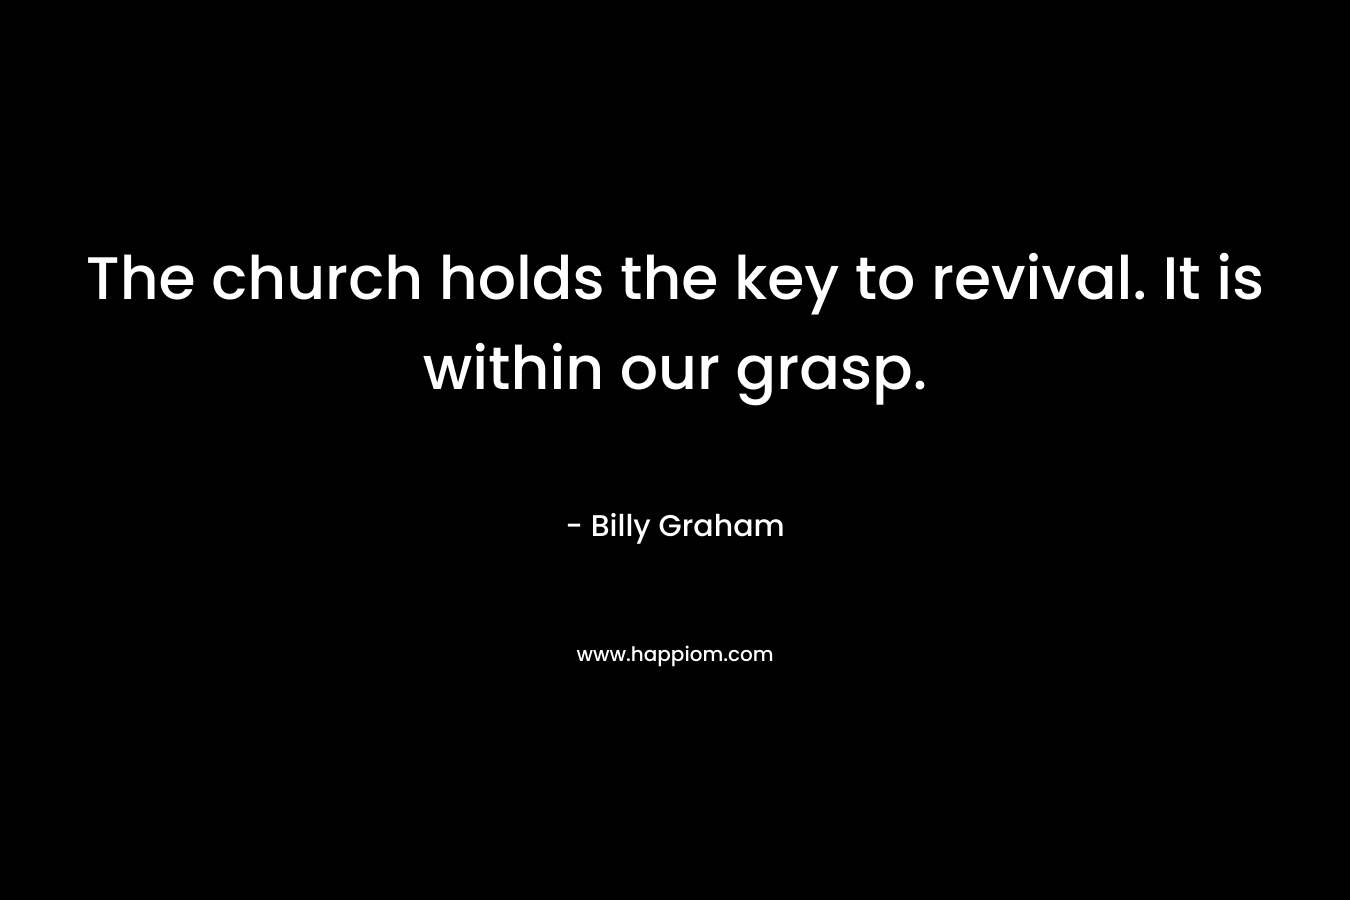 The church holds the key to revival. It is within our grasp.